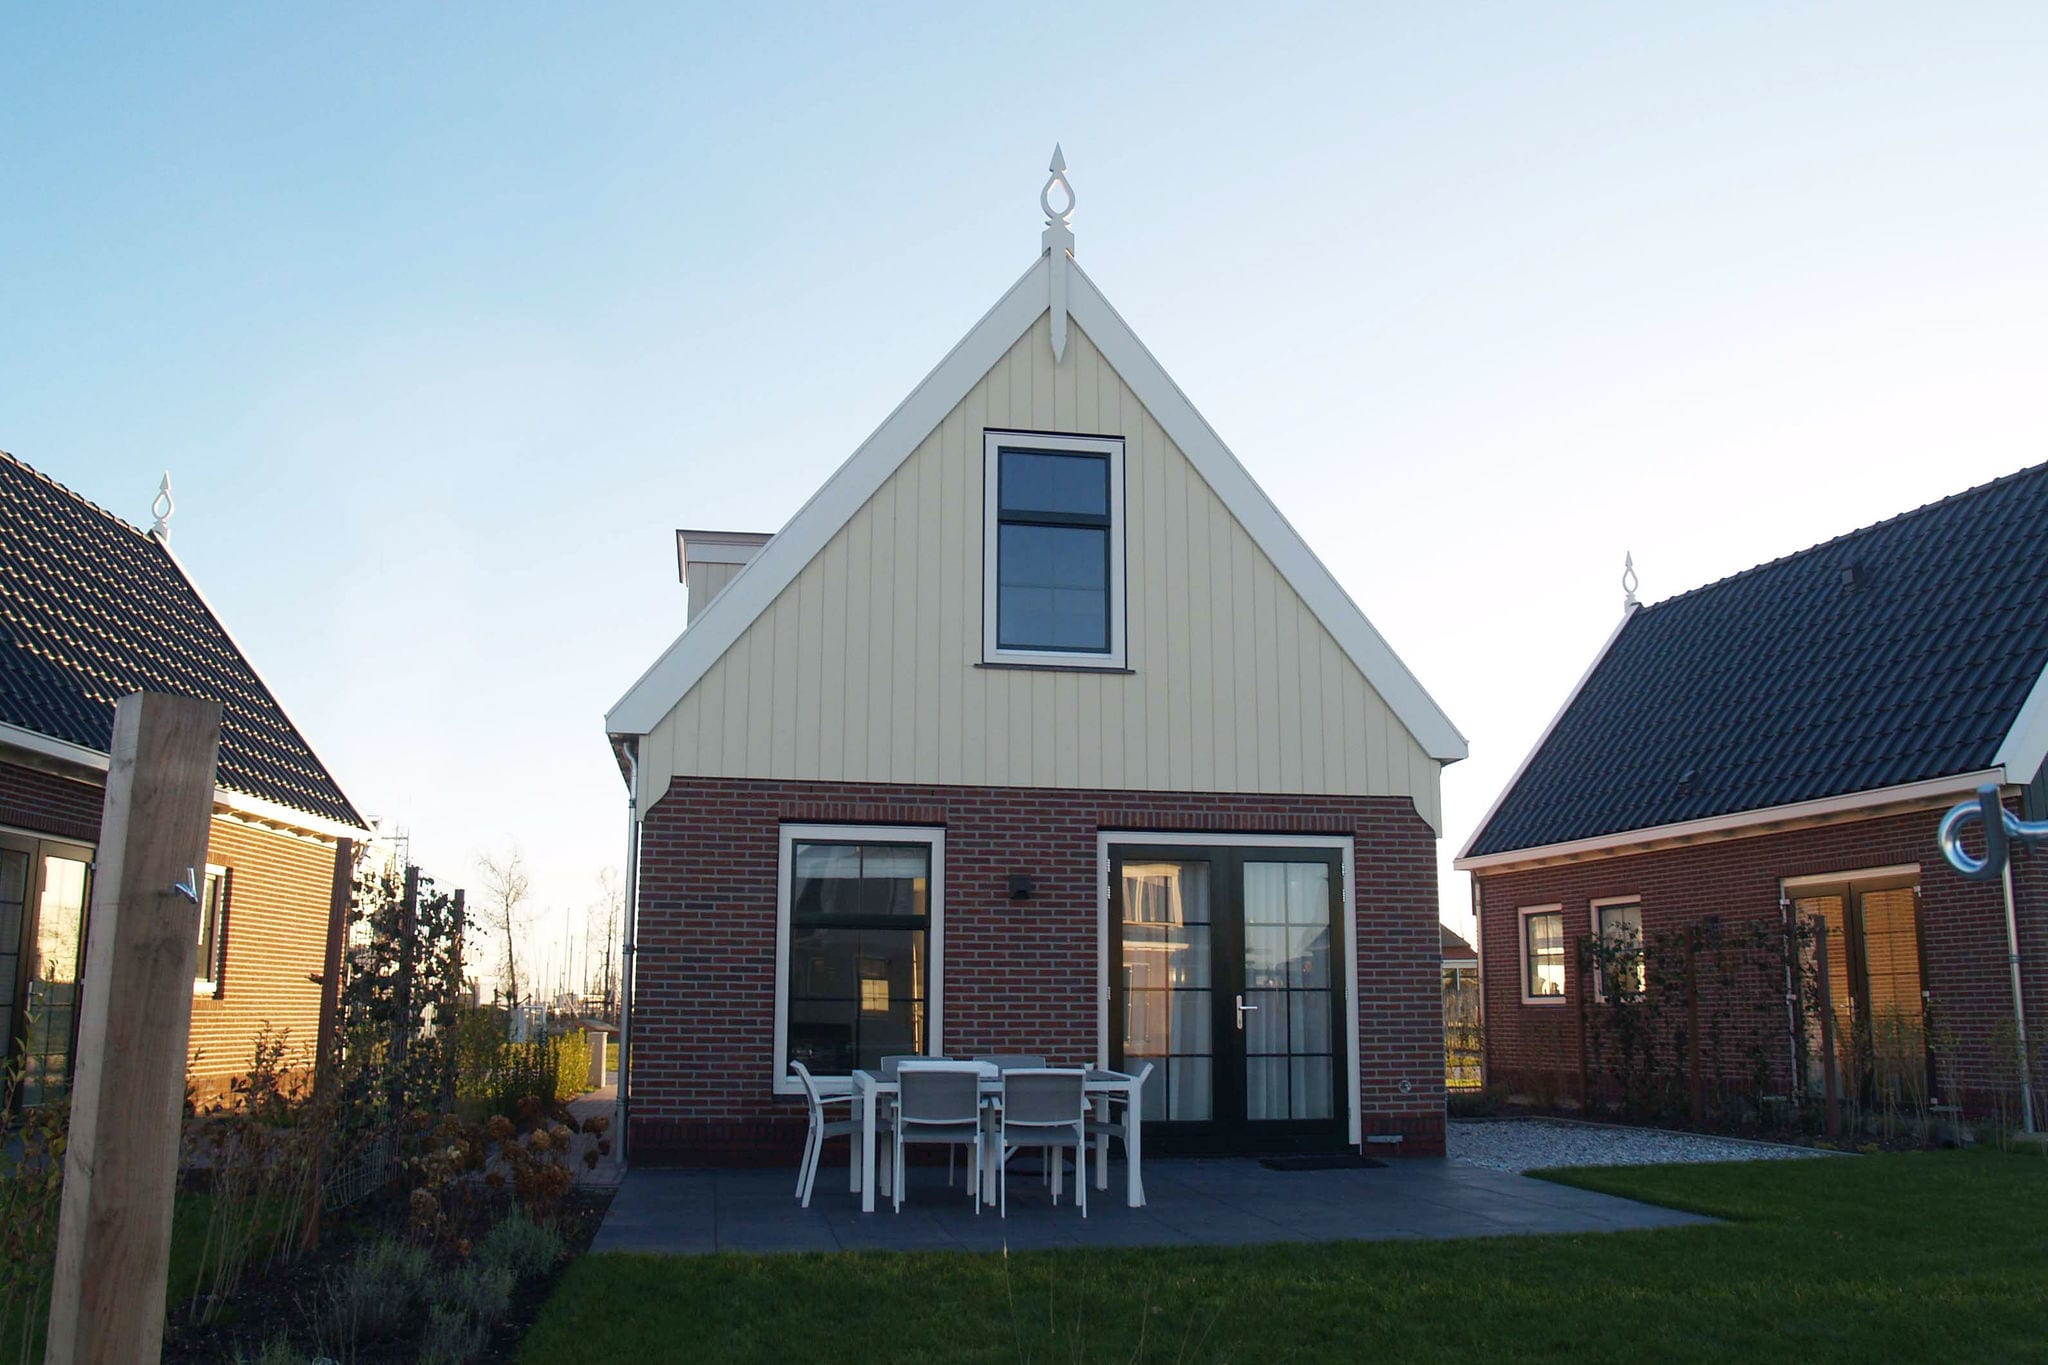 Detached holiday home on the Markermeer